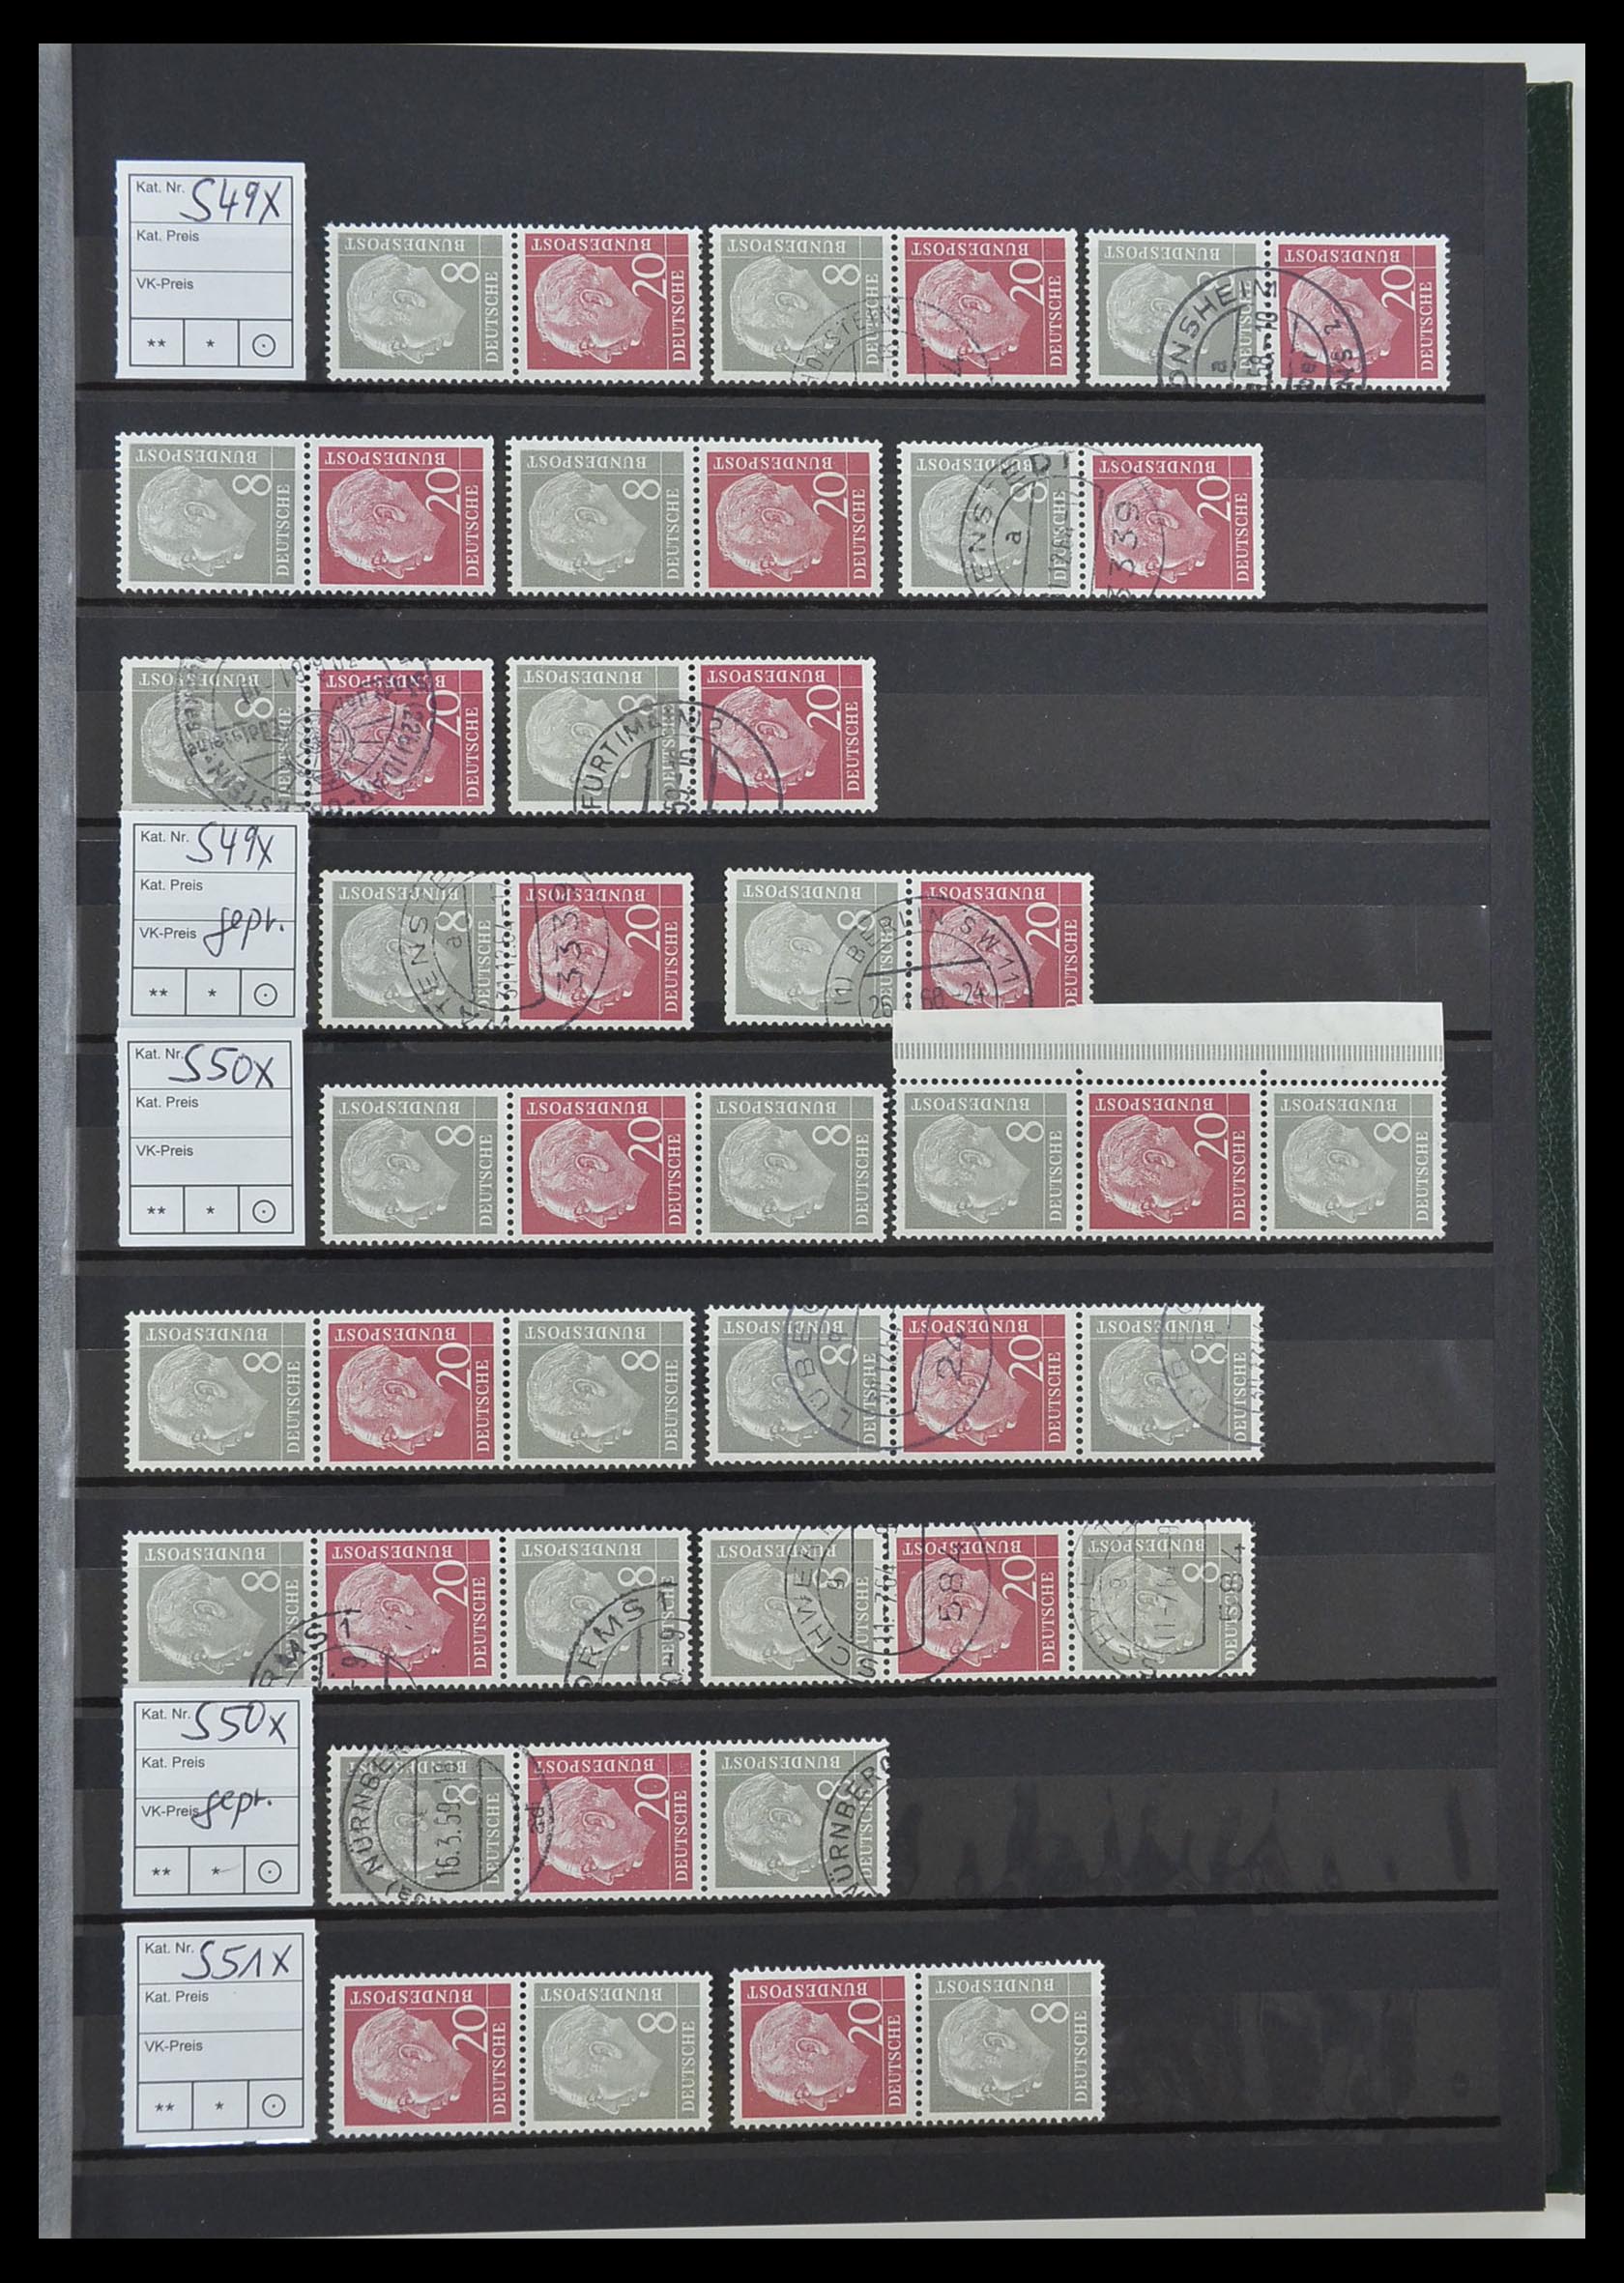 33275 023 - Stamp collection 33275 Bundespost combinations 1951-1960.